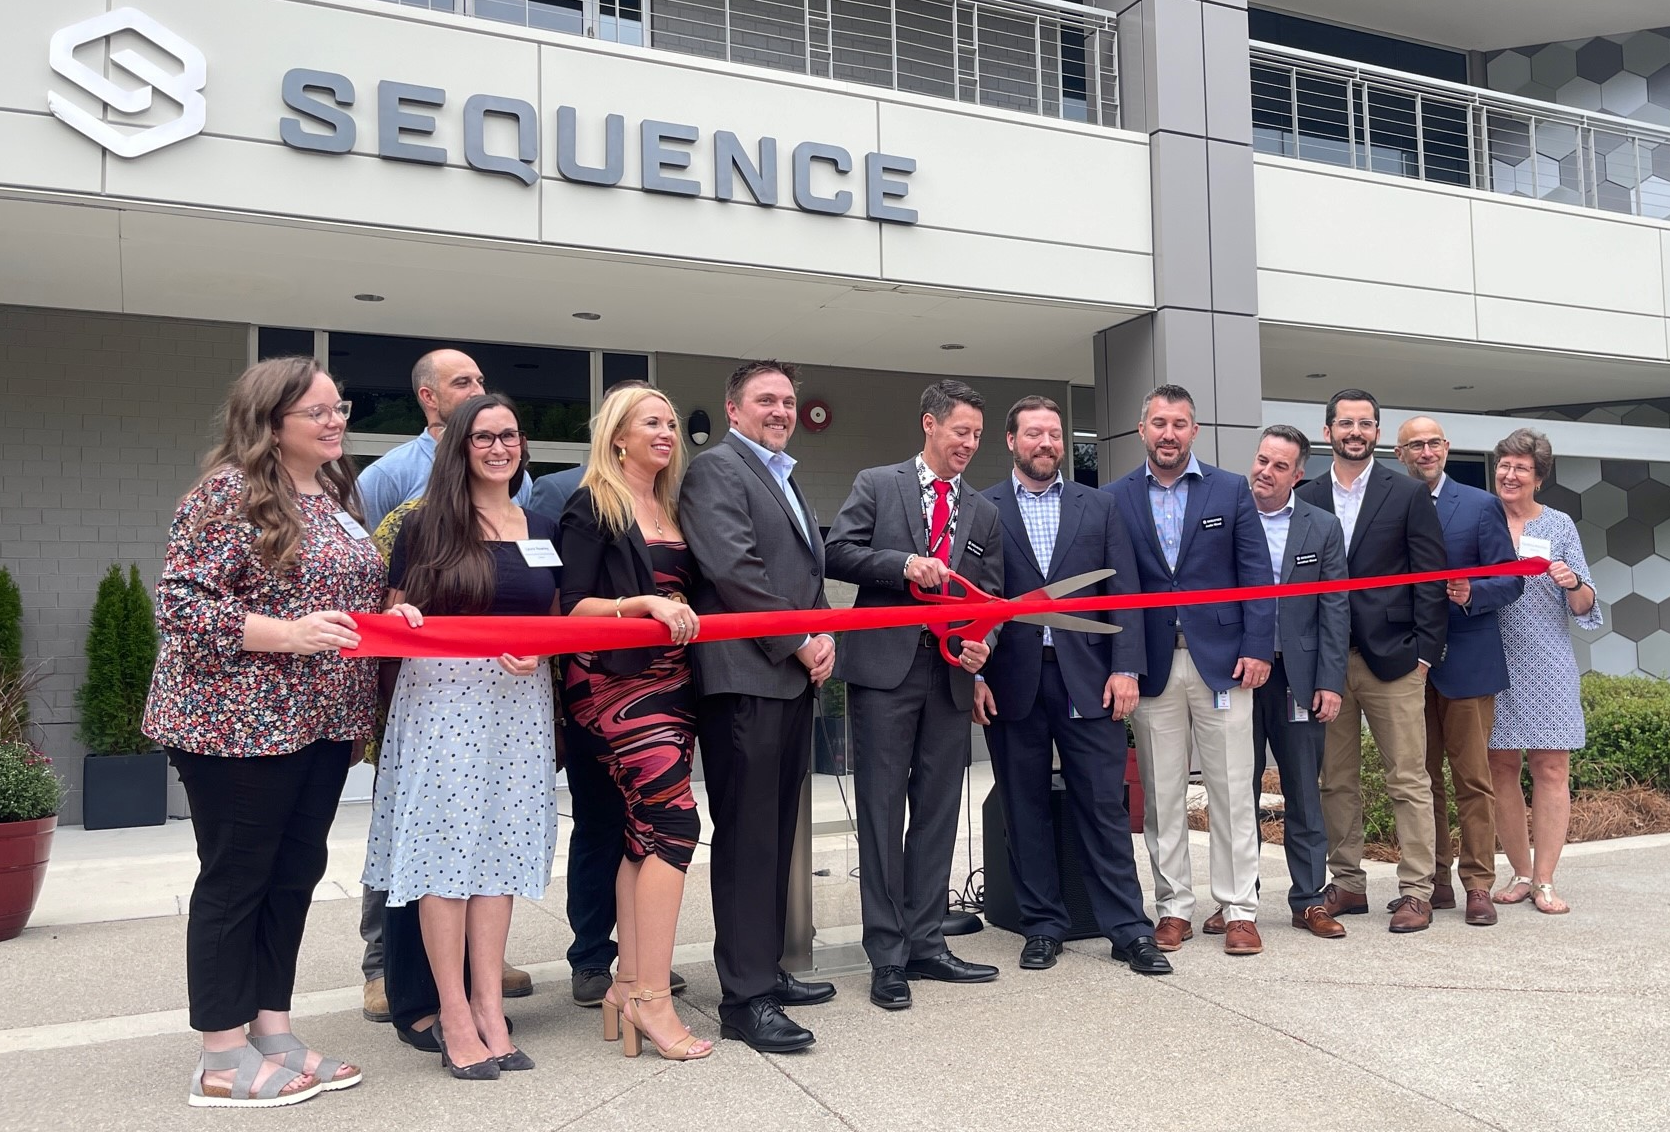 Sequence Ribbon Cutting Ceremony